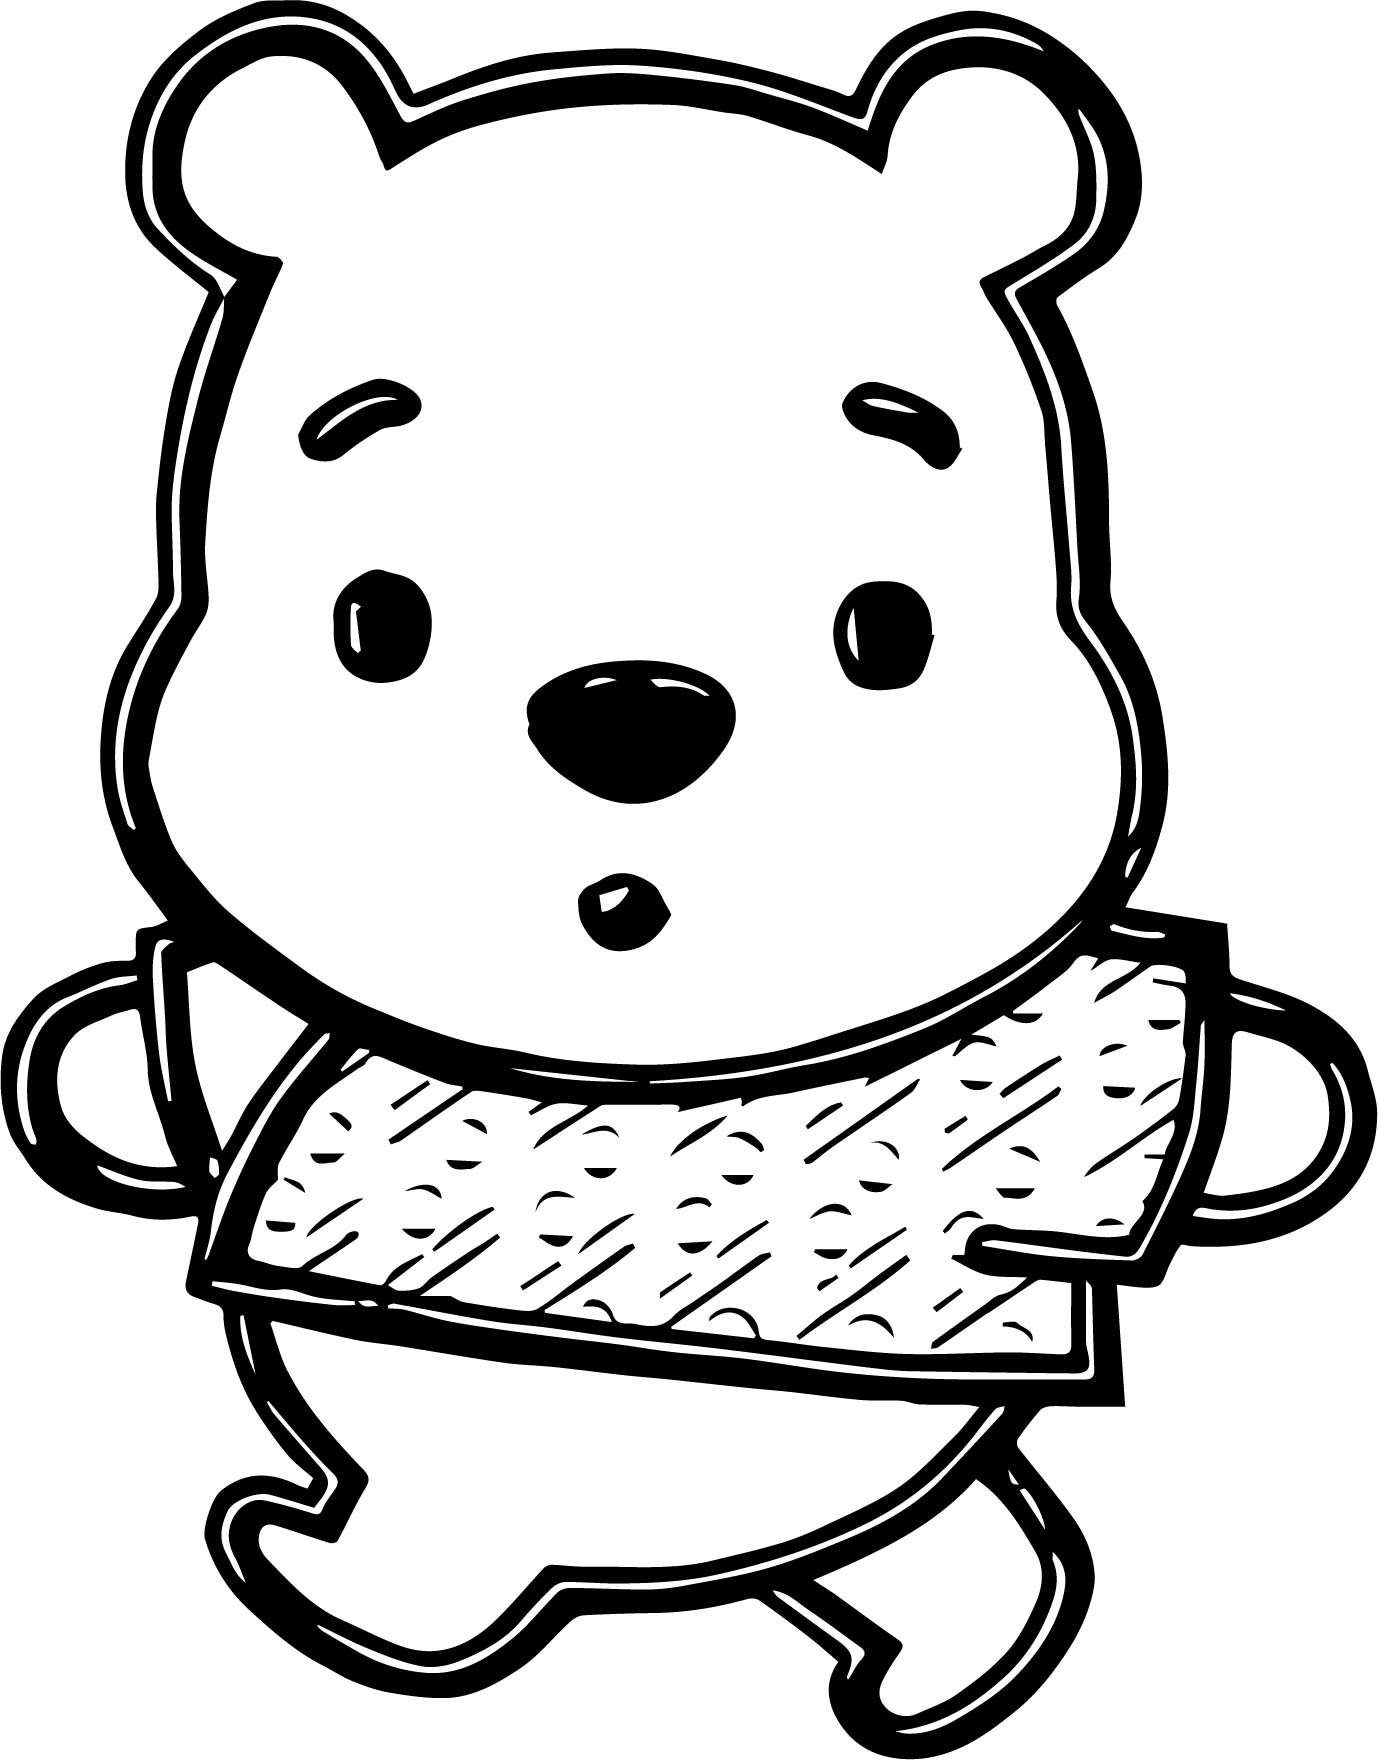 Chibi Animals Coloring Pages at GetColorings.com | Free printable ...